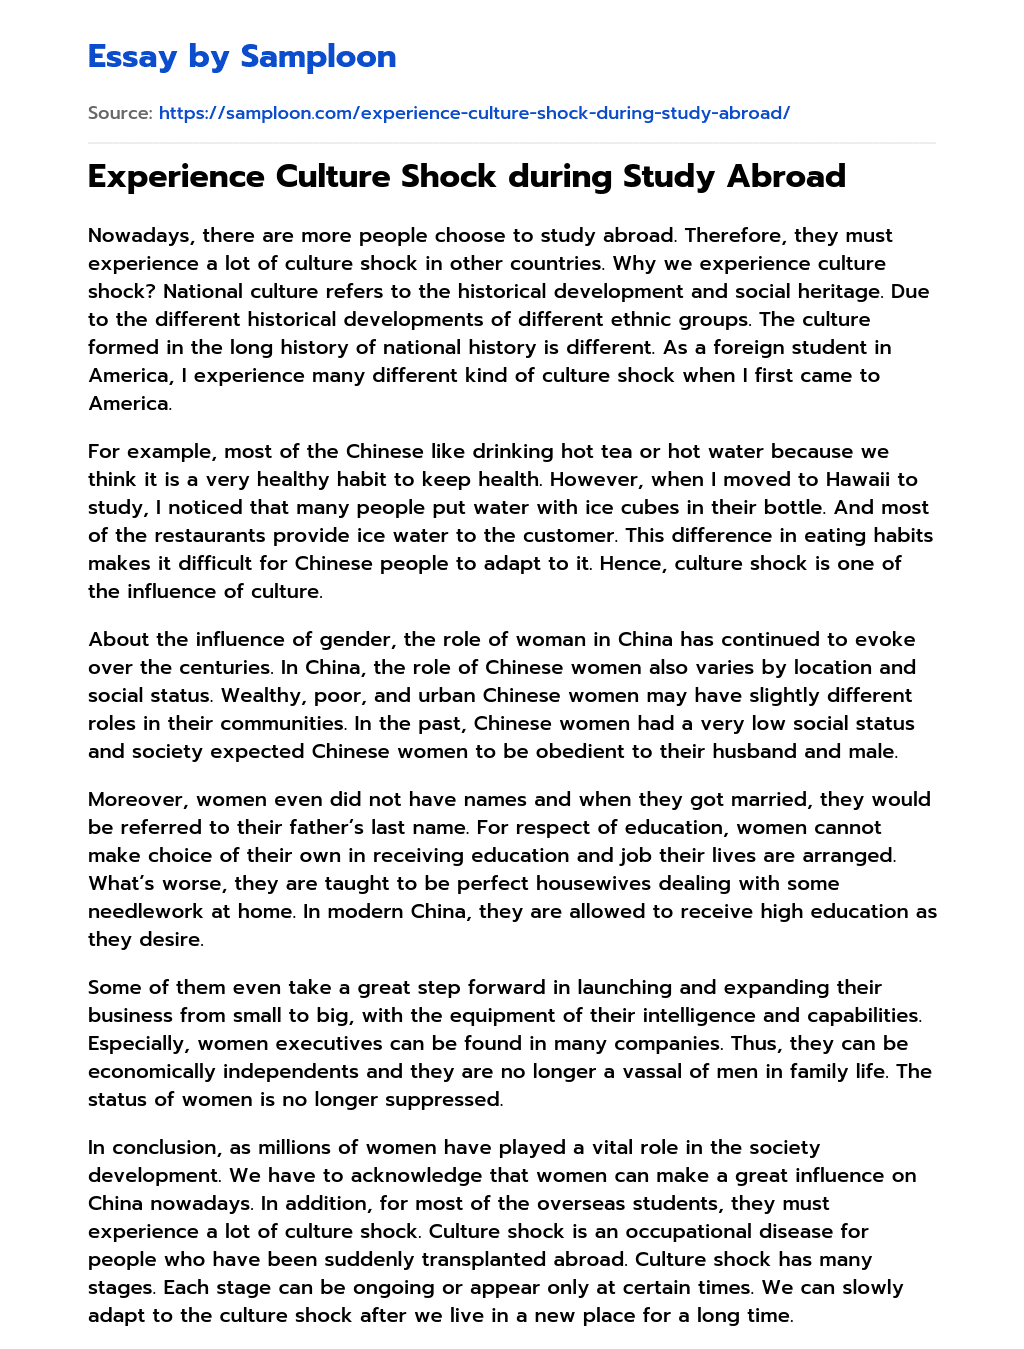 Experience Culture Shock during Study Abroad essay